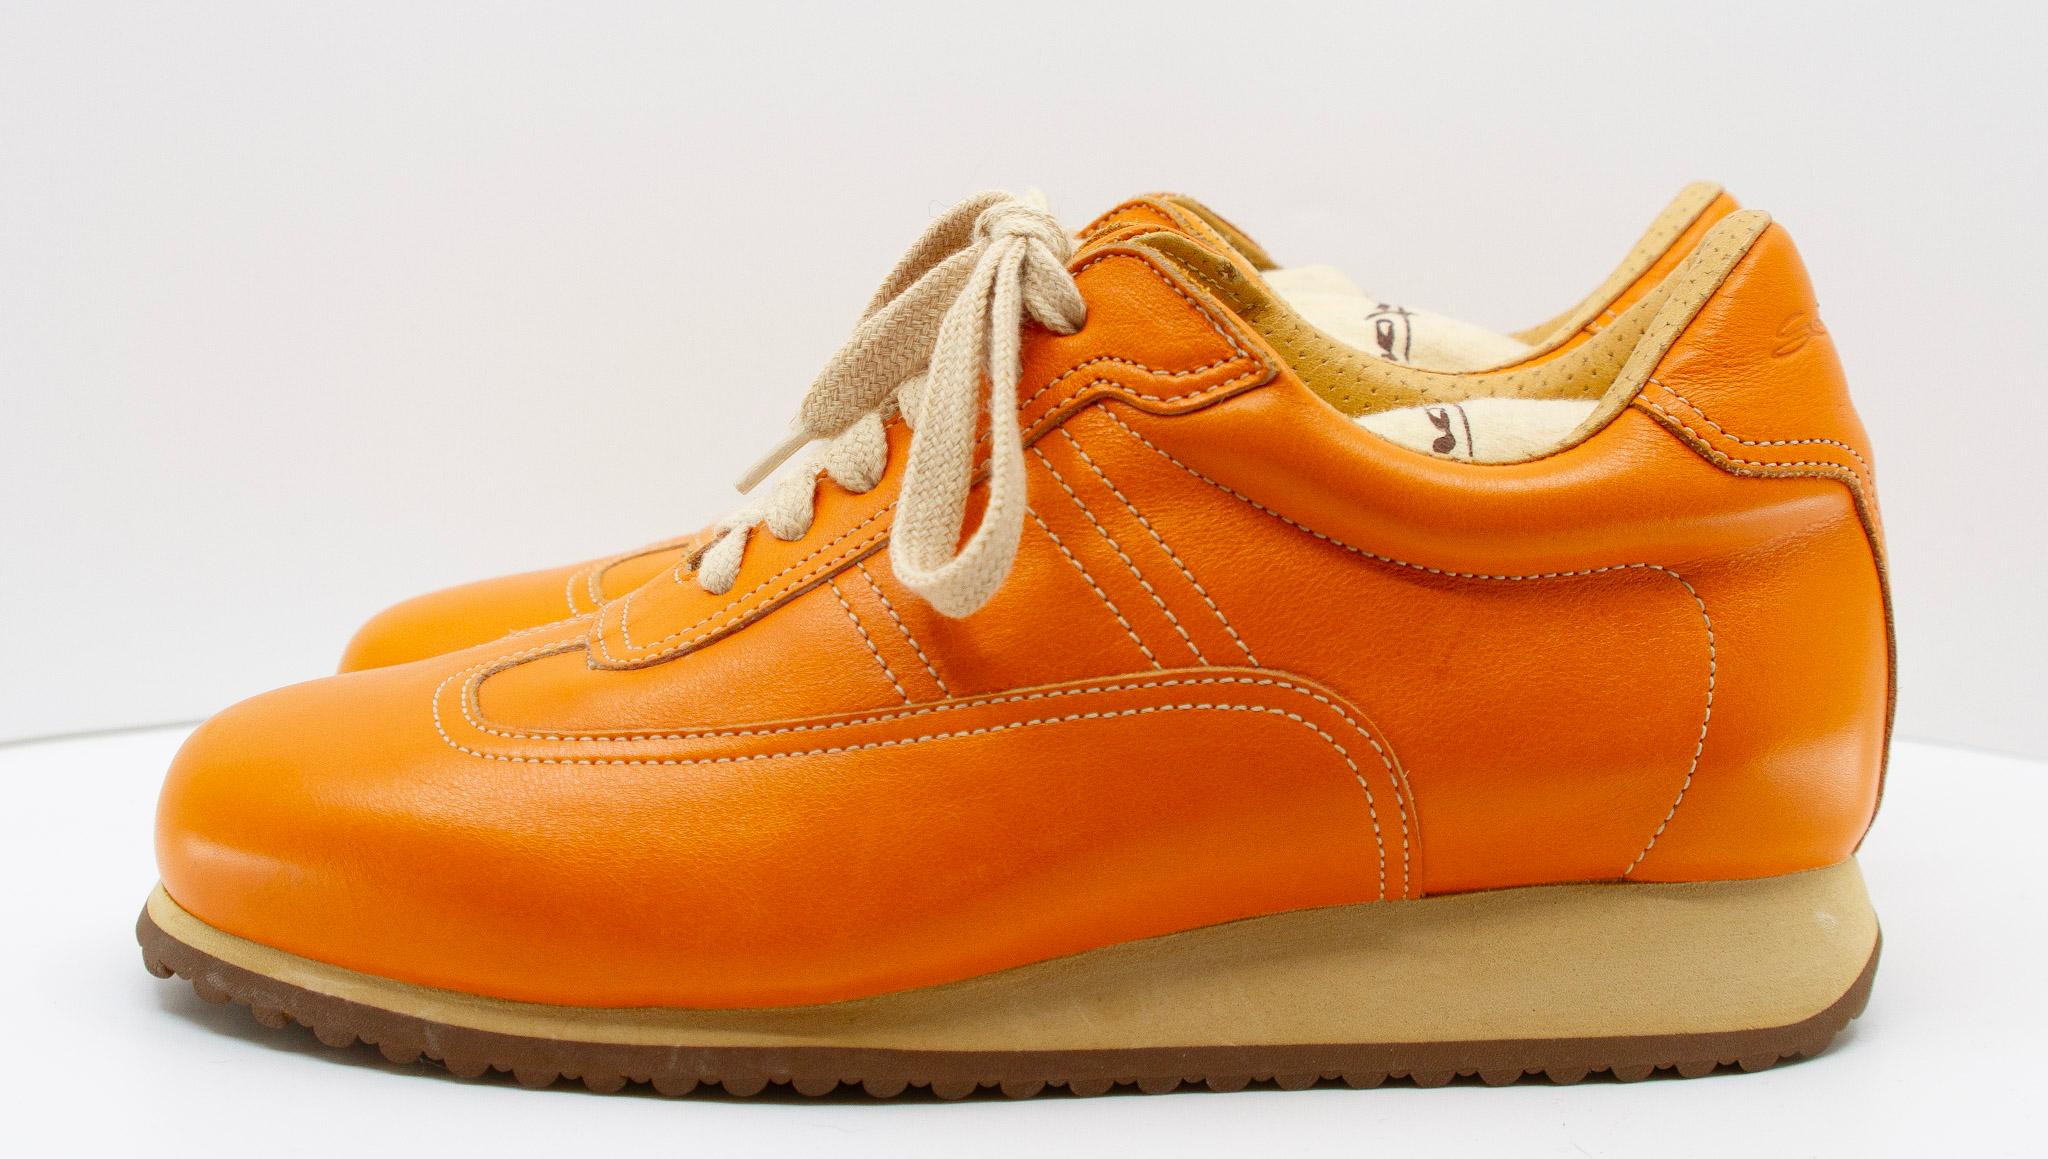 Santoni orange sneakers  In Excellent Condition For Sale In Kingston, NY